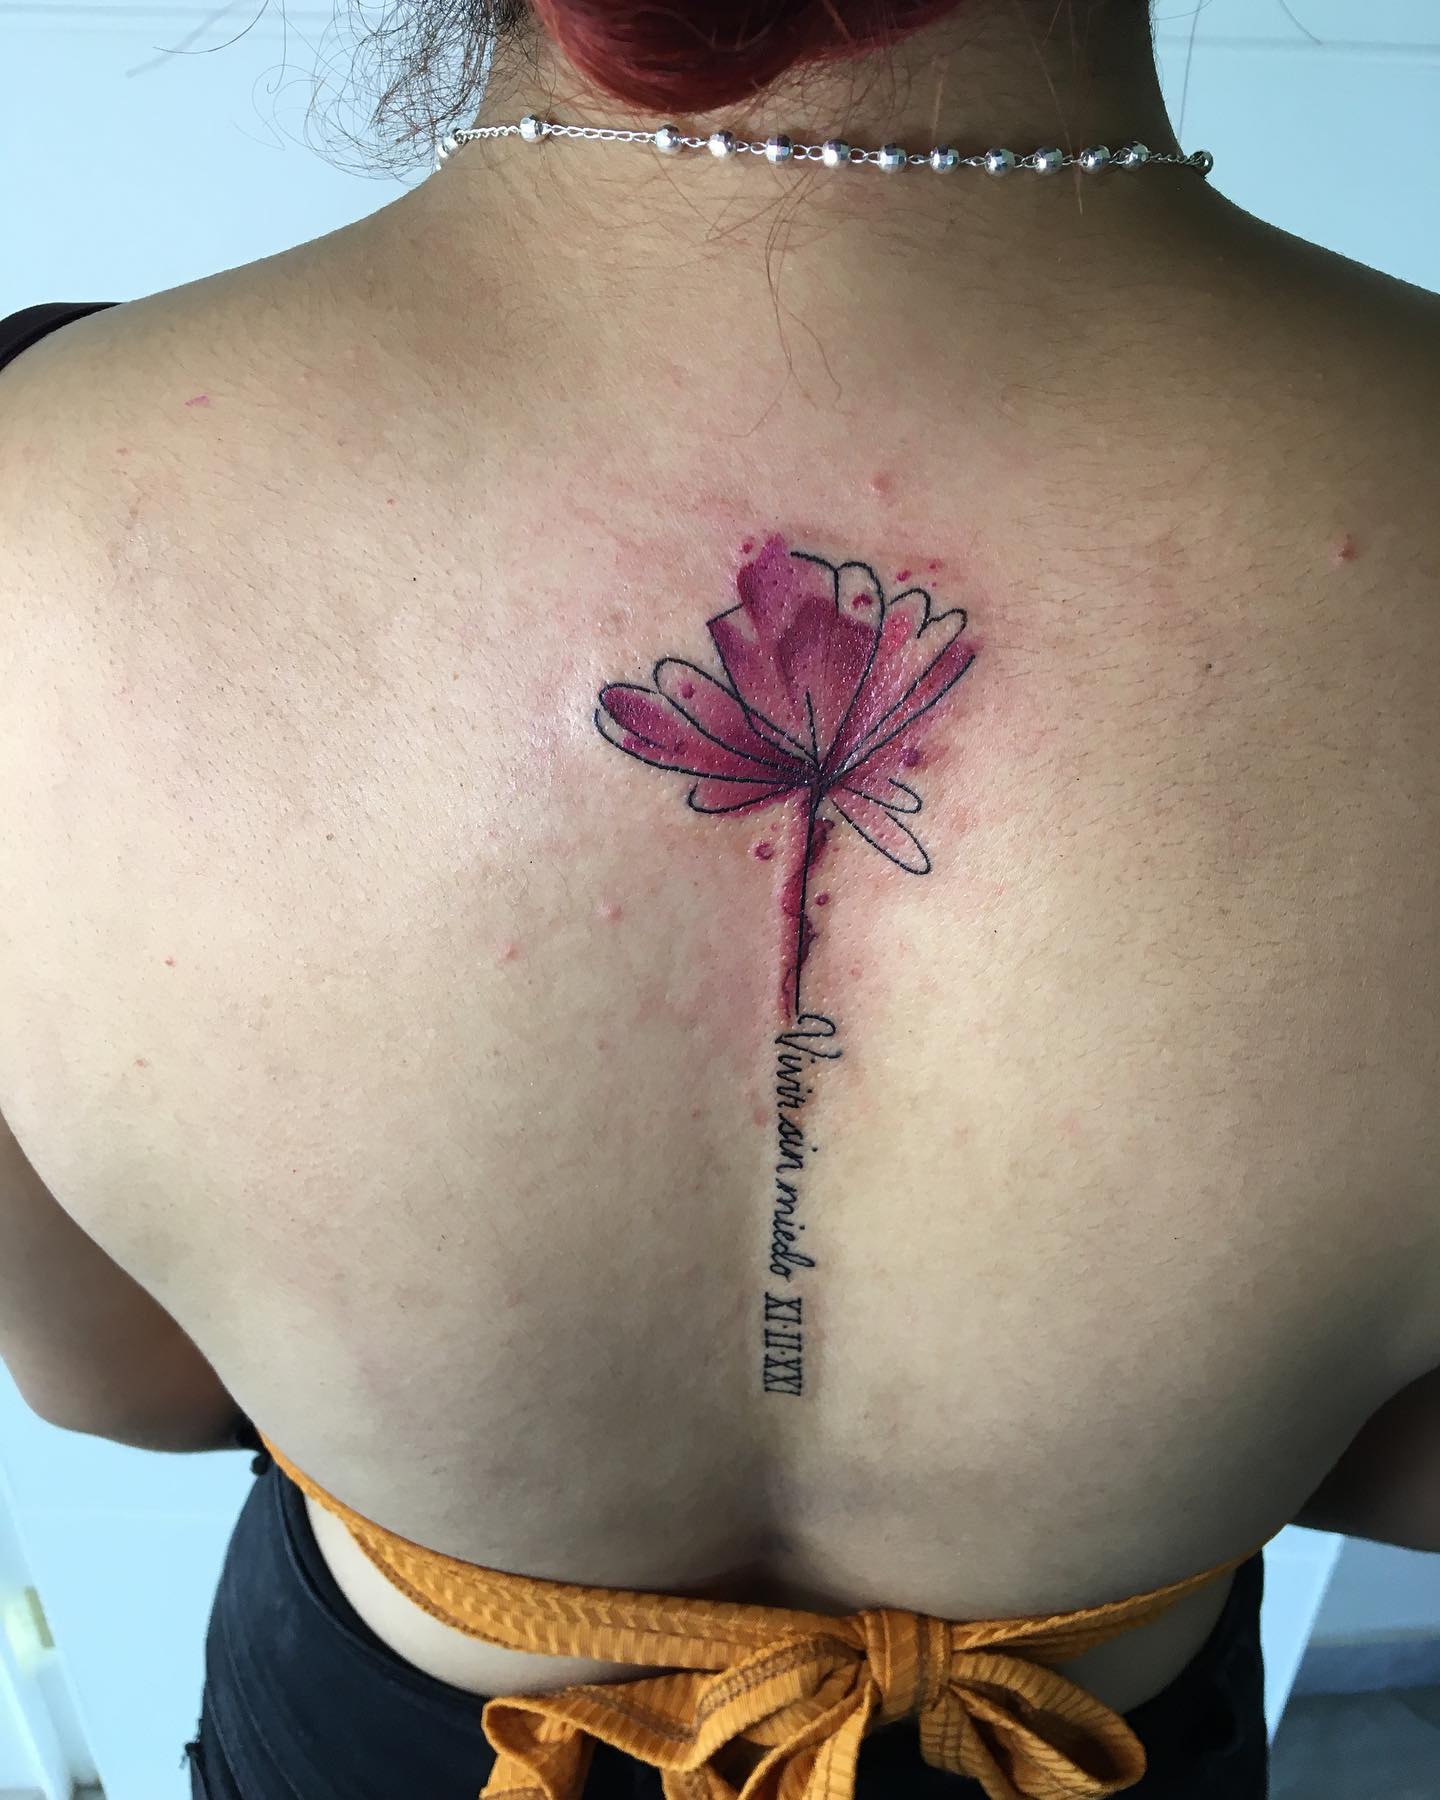 This pink flower tattoo along with a symbolic quote will suit those who fancy sentimental pieces the best.